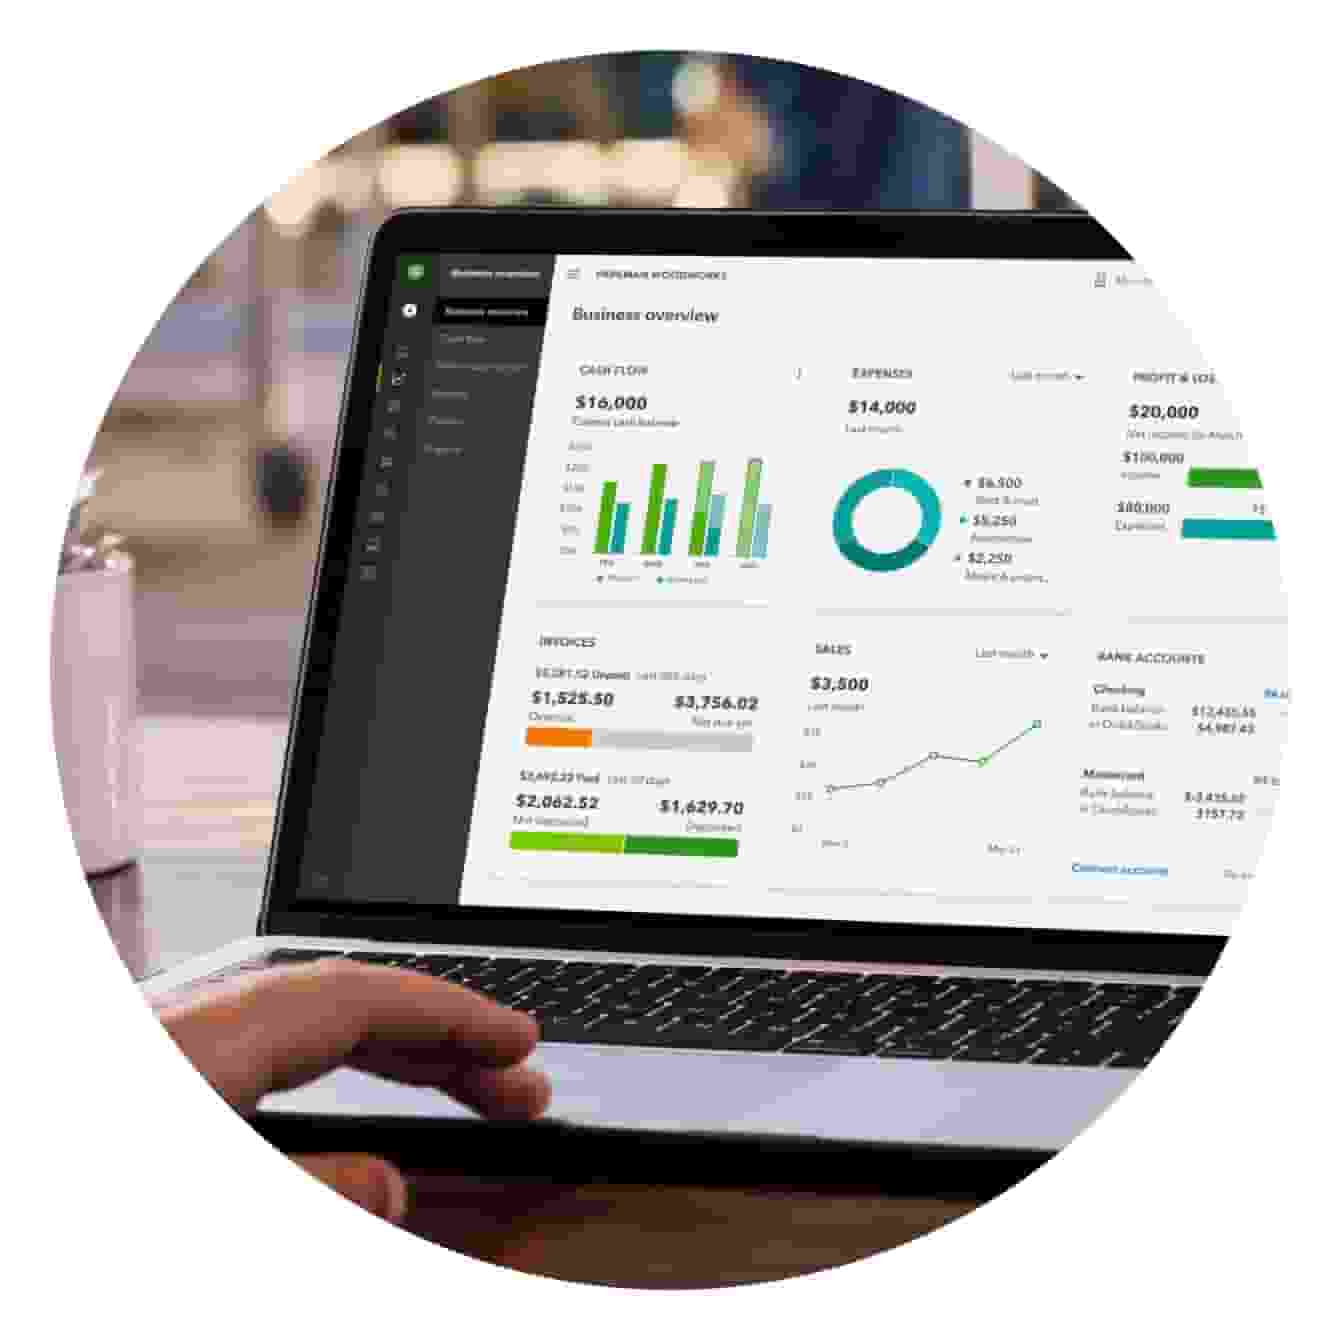 QuickBooks Online Business Overview showing cash flow, expenses, profit & loss, invoices, sales, and bank accounts.